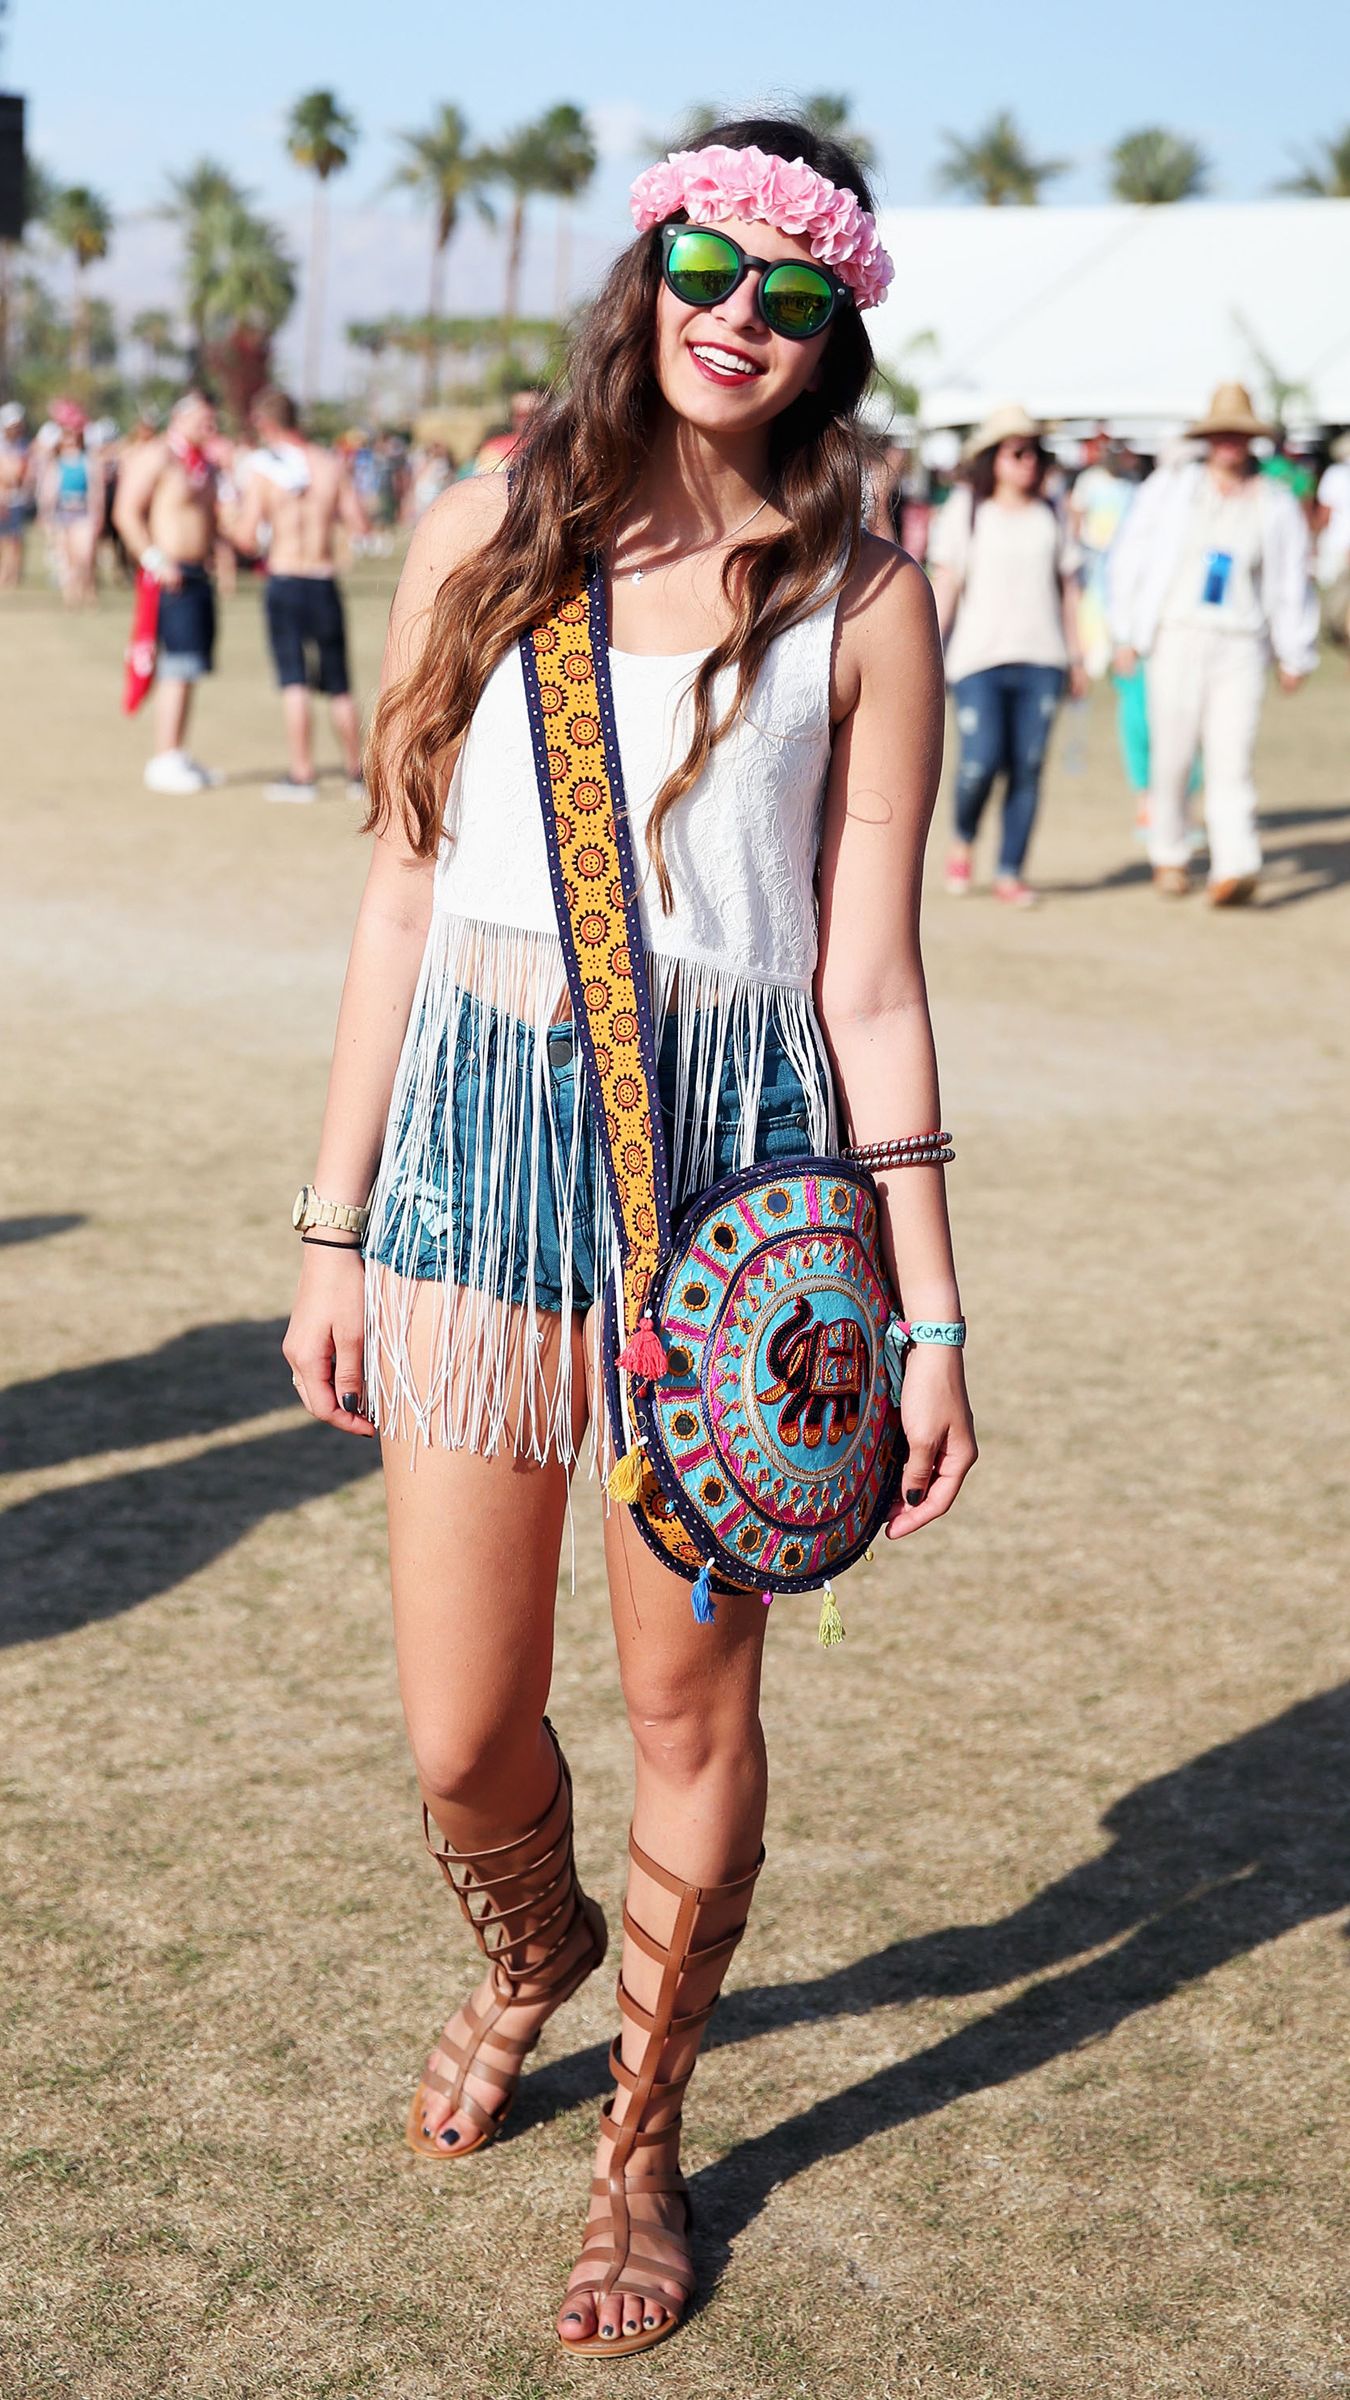 Coachella is back. But have escaped the problematic of 'boho chic'? | CNN